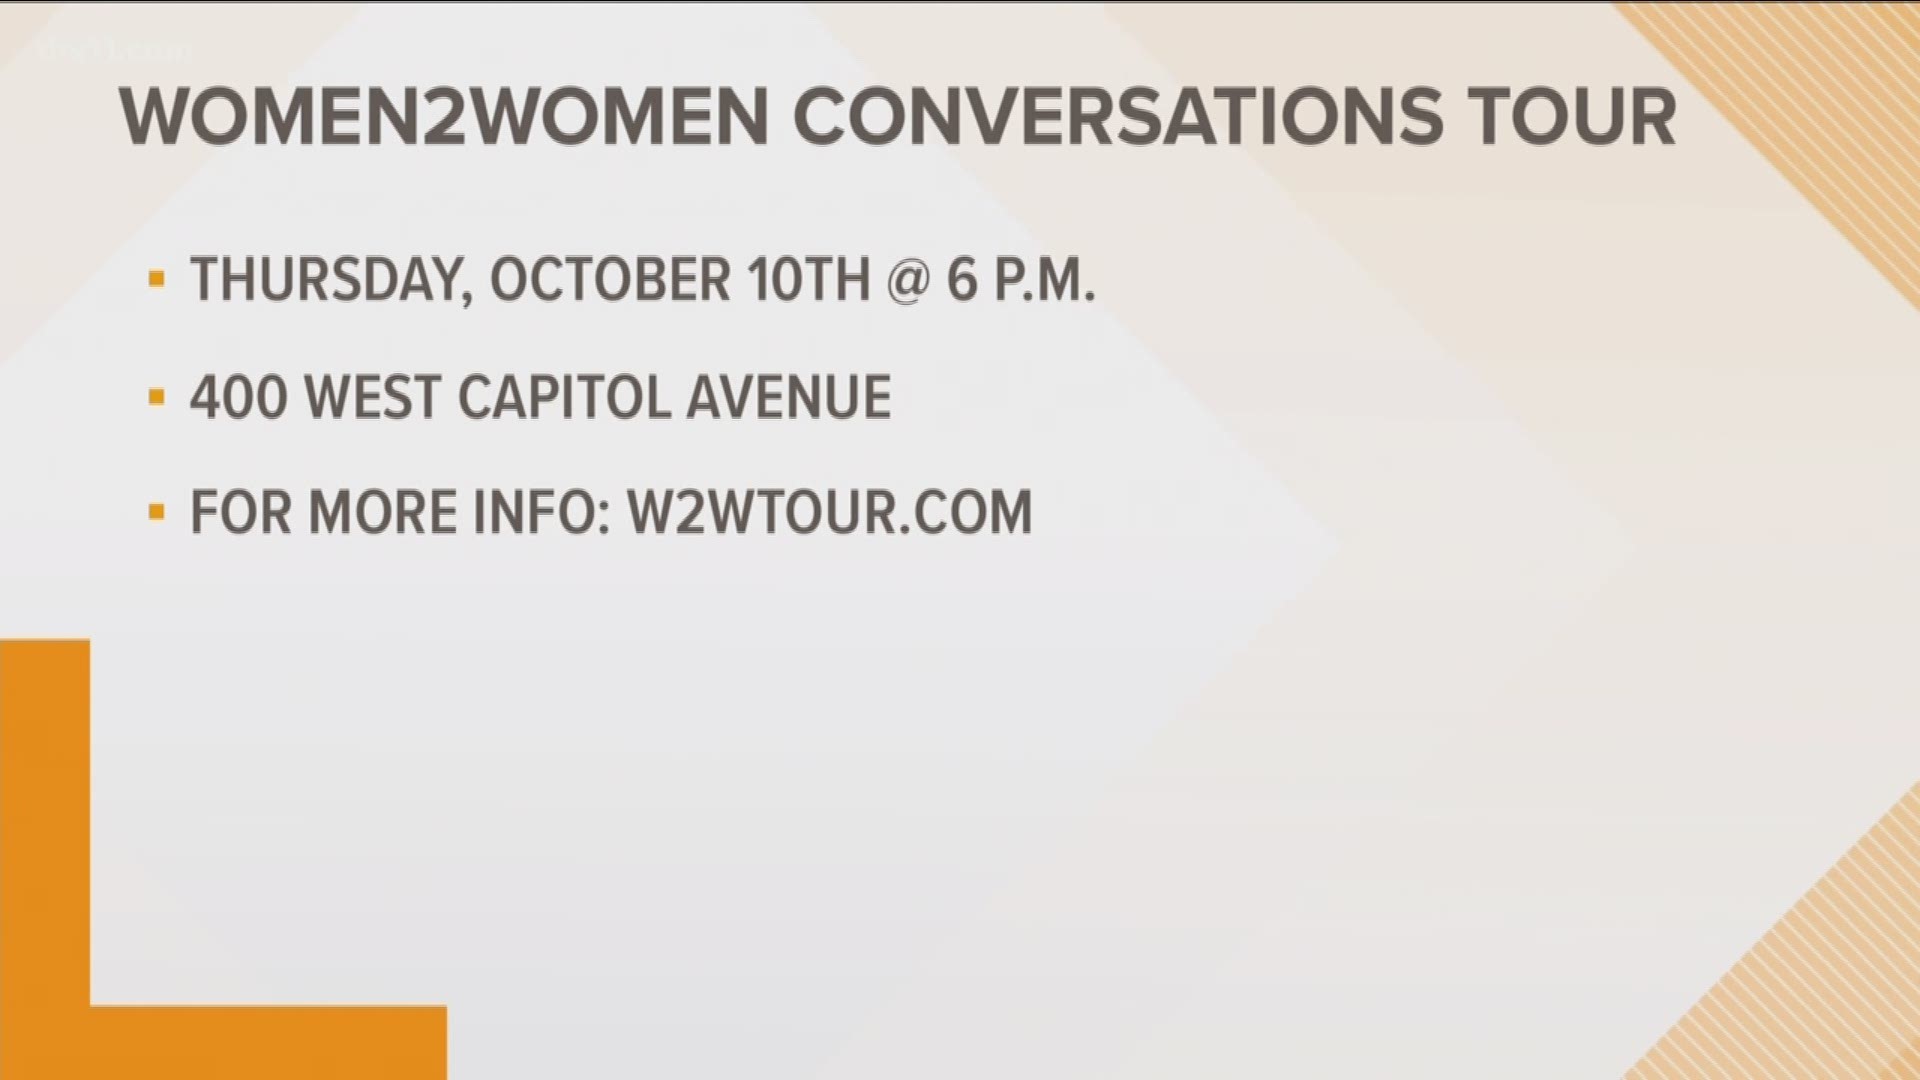 The Women2Women conversations tour is town hall style event that connects women with inspiring leaders in their communities.